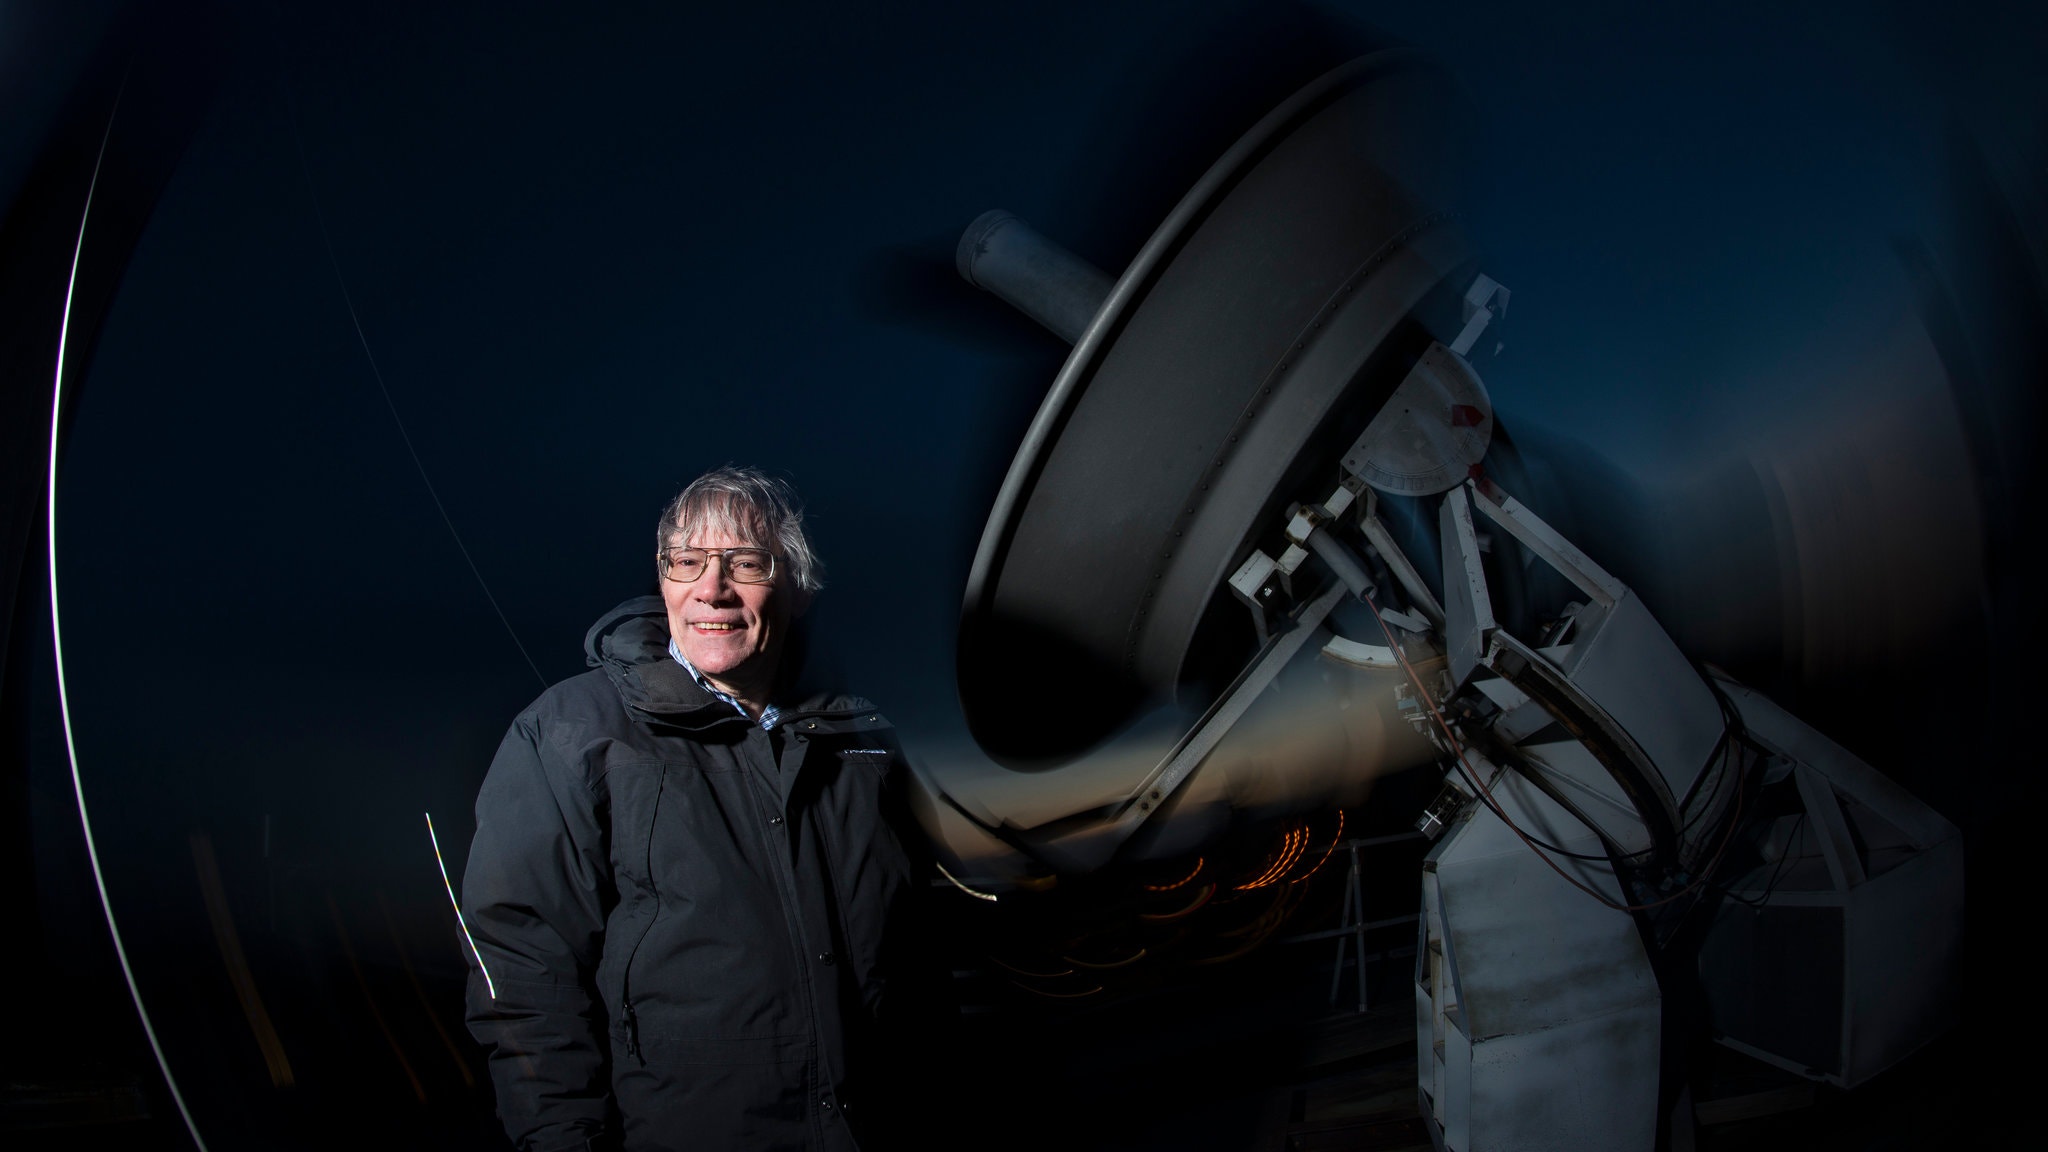 Alan Guth was
						one of the first physicists to hypothesize the existence
						of inflation, which explains how the universe expanded so
						uniformly and so quickly in the instant after the Big Bang
						13.8 billion years ago.